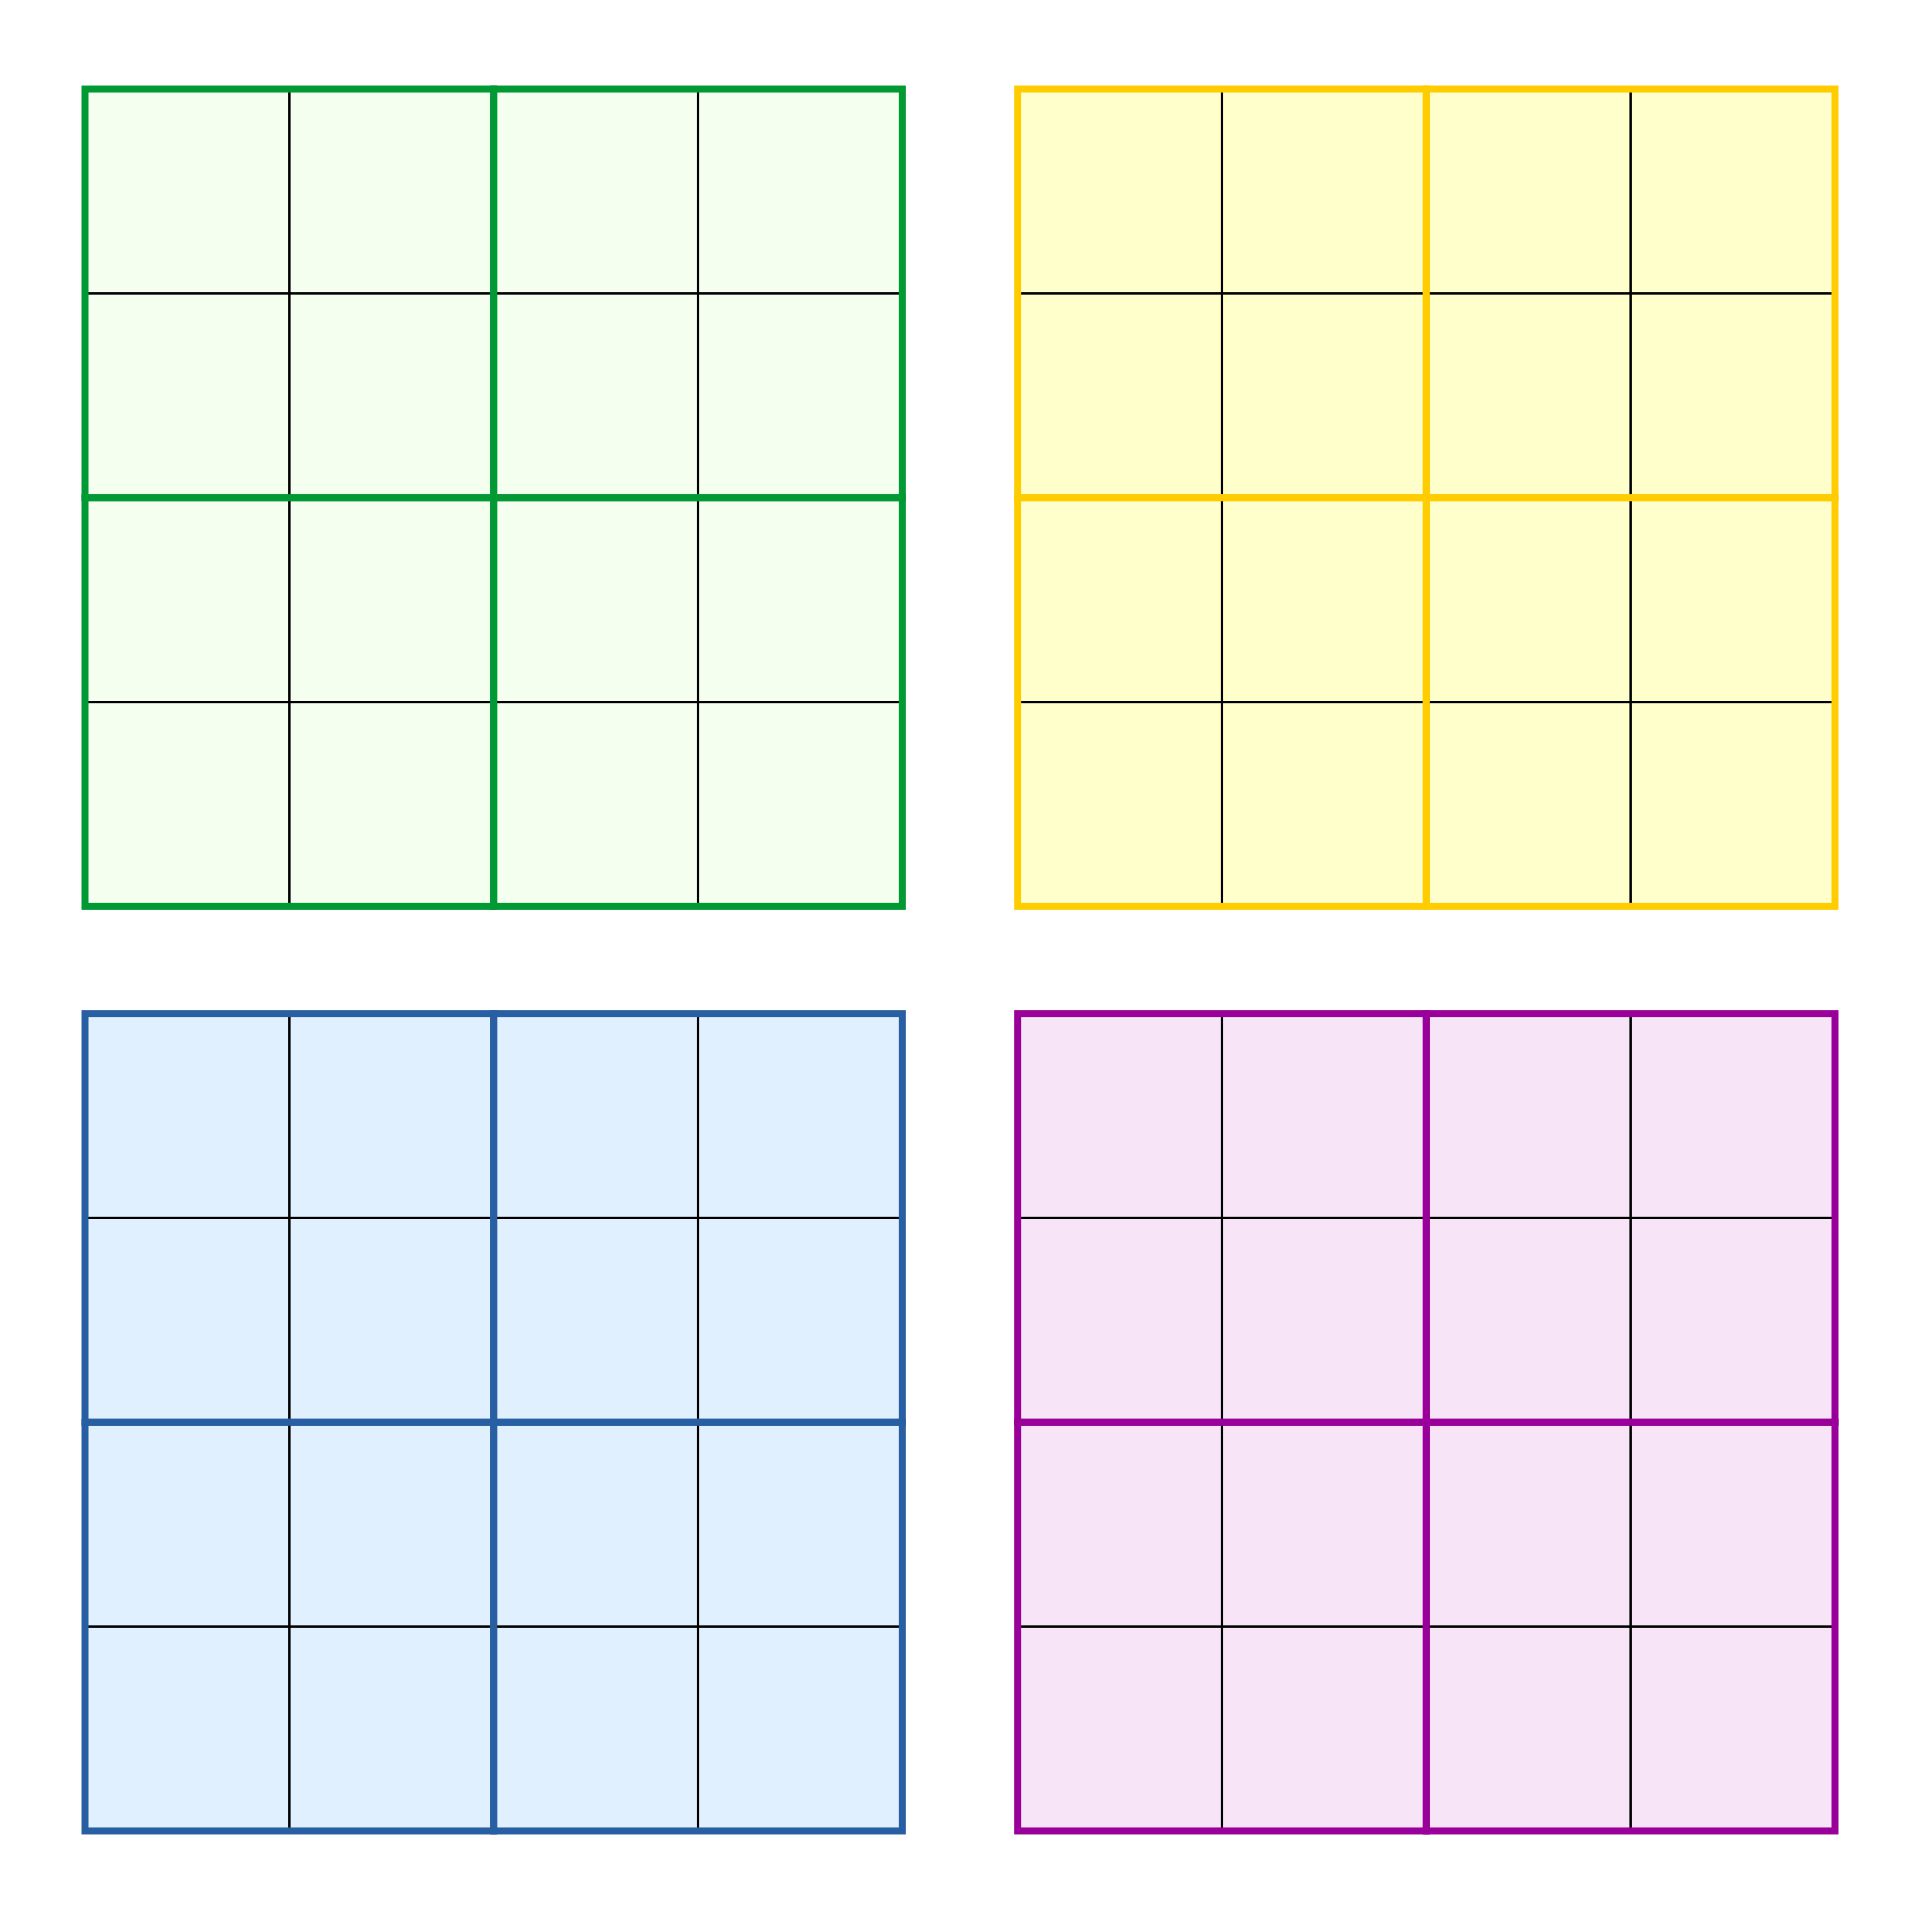 5 Best Images of Blank Sudoku Grids Printable 4 X 4 Grids Free Print